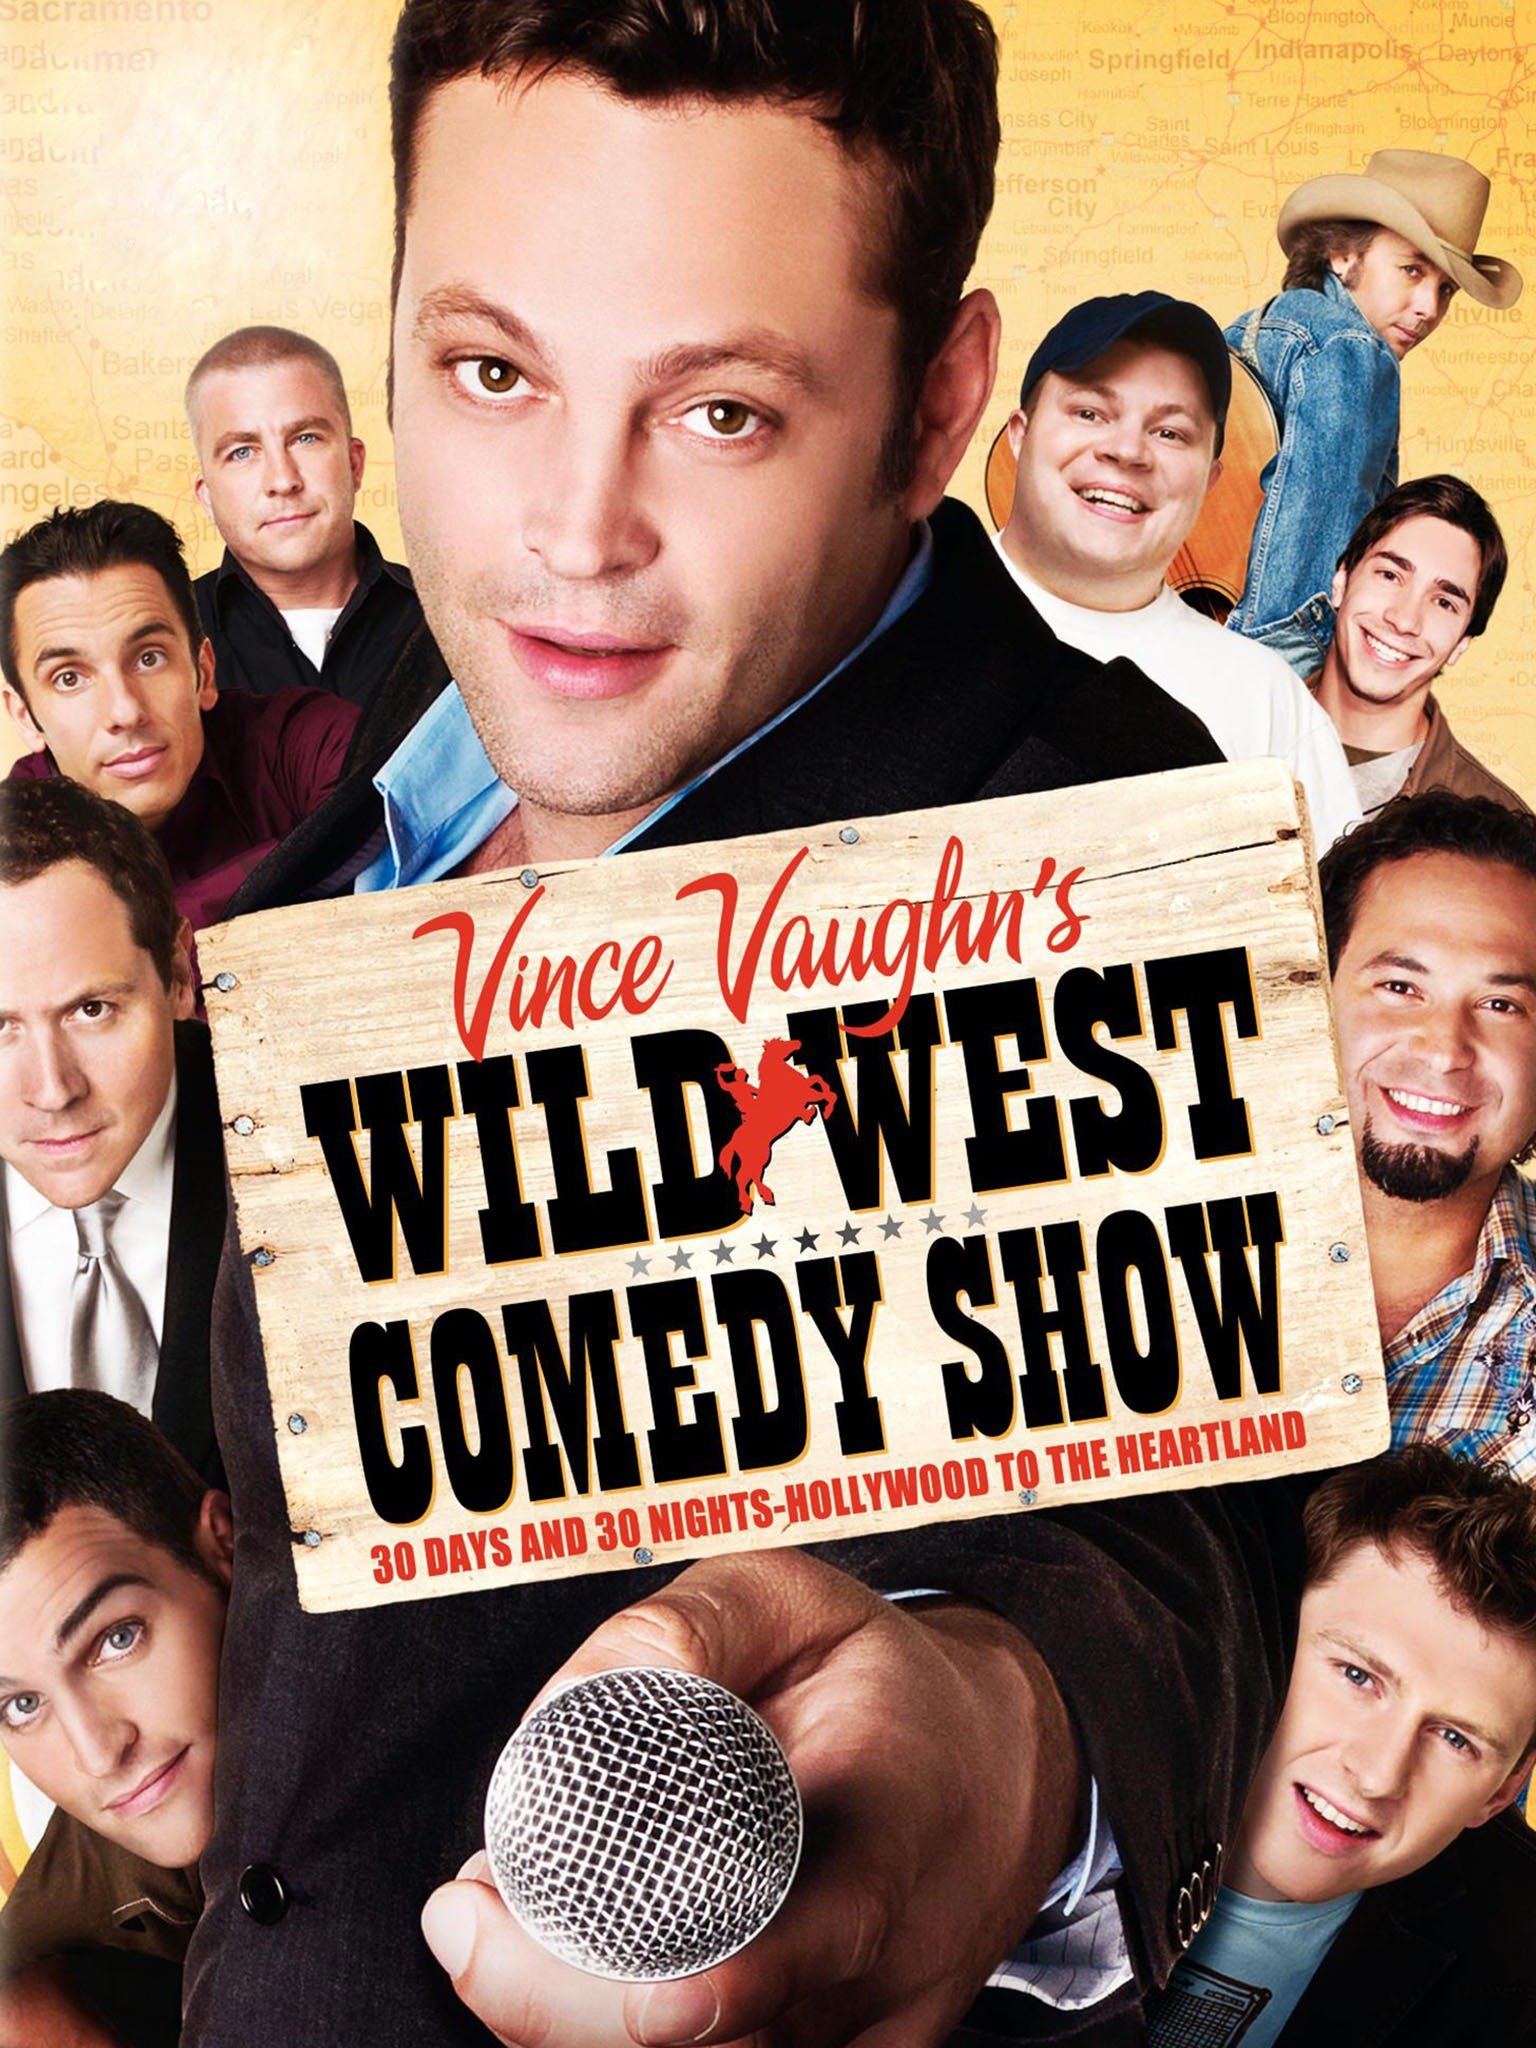 Vince Vaughns Wild West Comedy Show 30 Days and 30 Nights - Hollywood to the Heartland pic